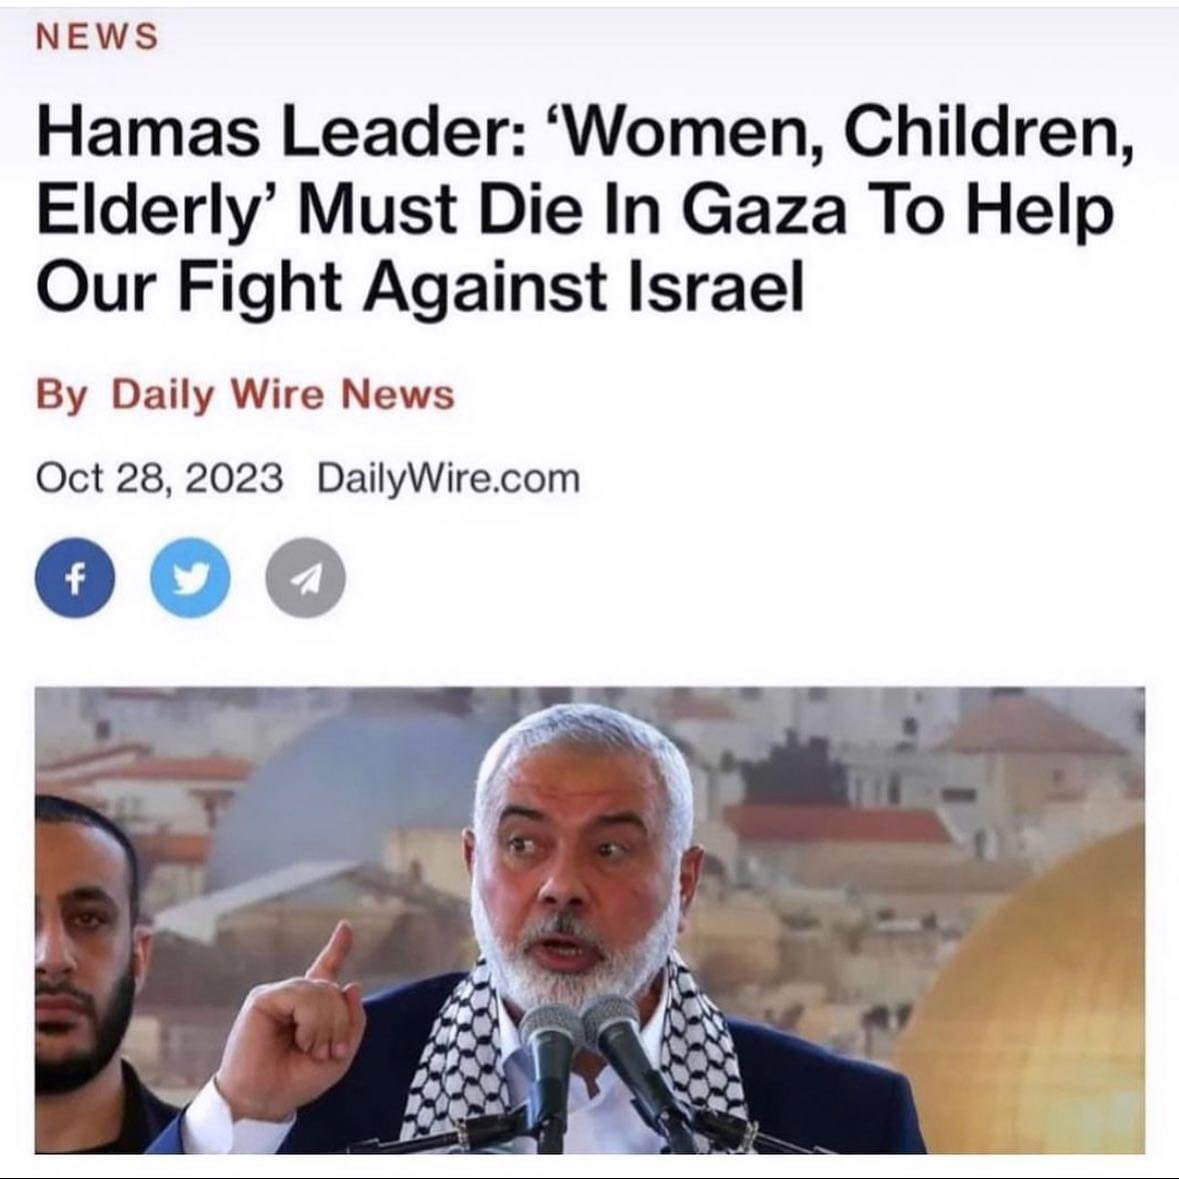 Hamas is trying to win, as always, by putting Israel into this horrible position where Israel 'doesn't have a clean shot'. Hamas knows that the world applies twisted expectations for Israel, and that somehow Israel is supposed to fight a war without any civilian casualties. The